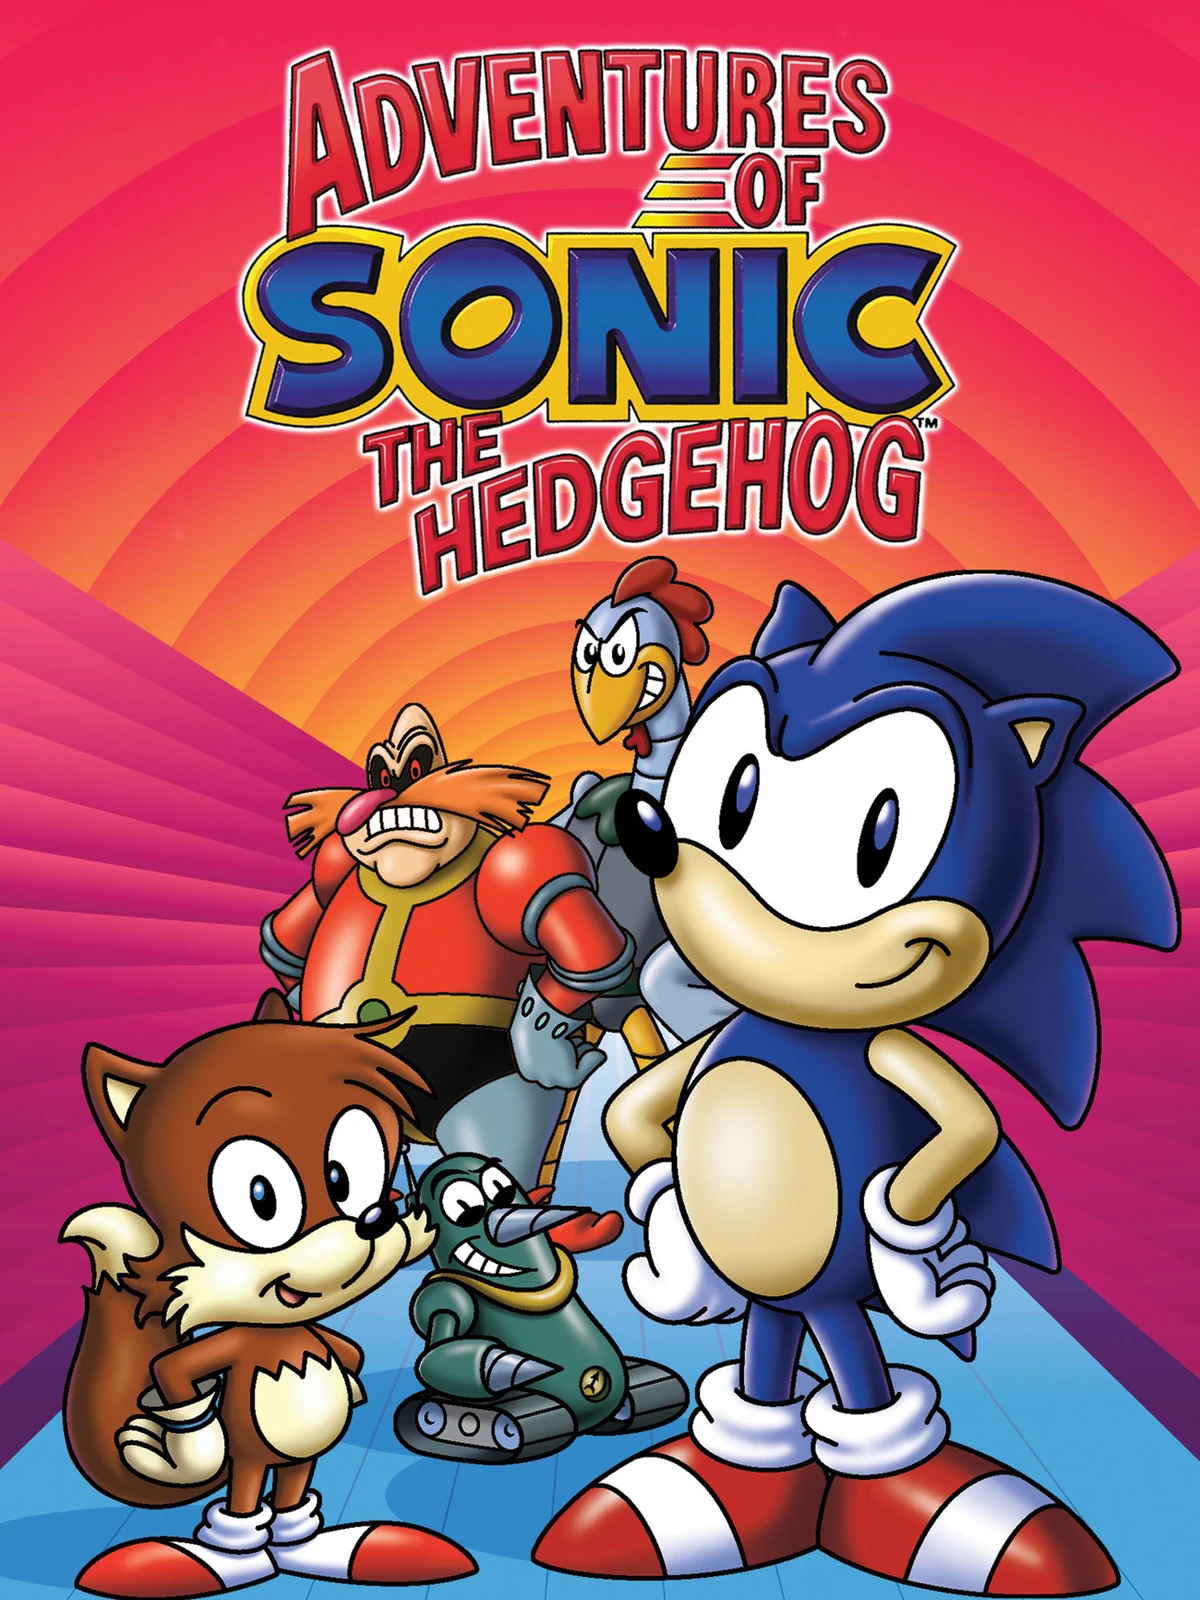 Sonic the Hedgehog (character) - Simple English Wikipedia, the